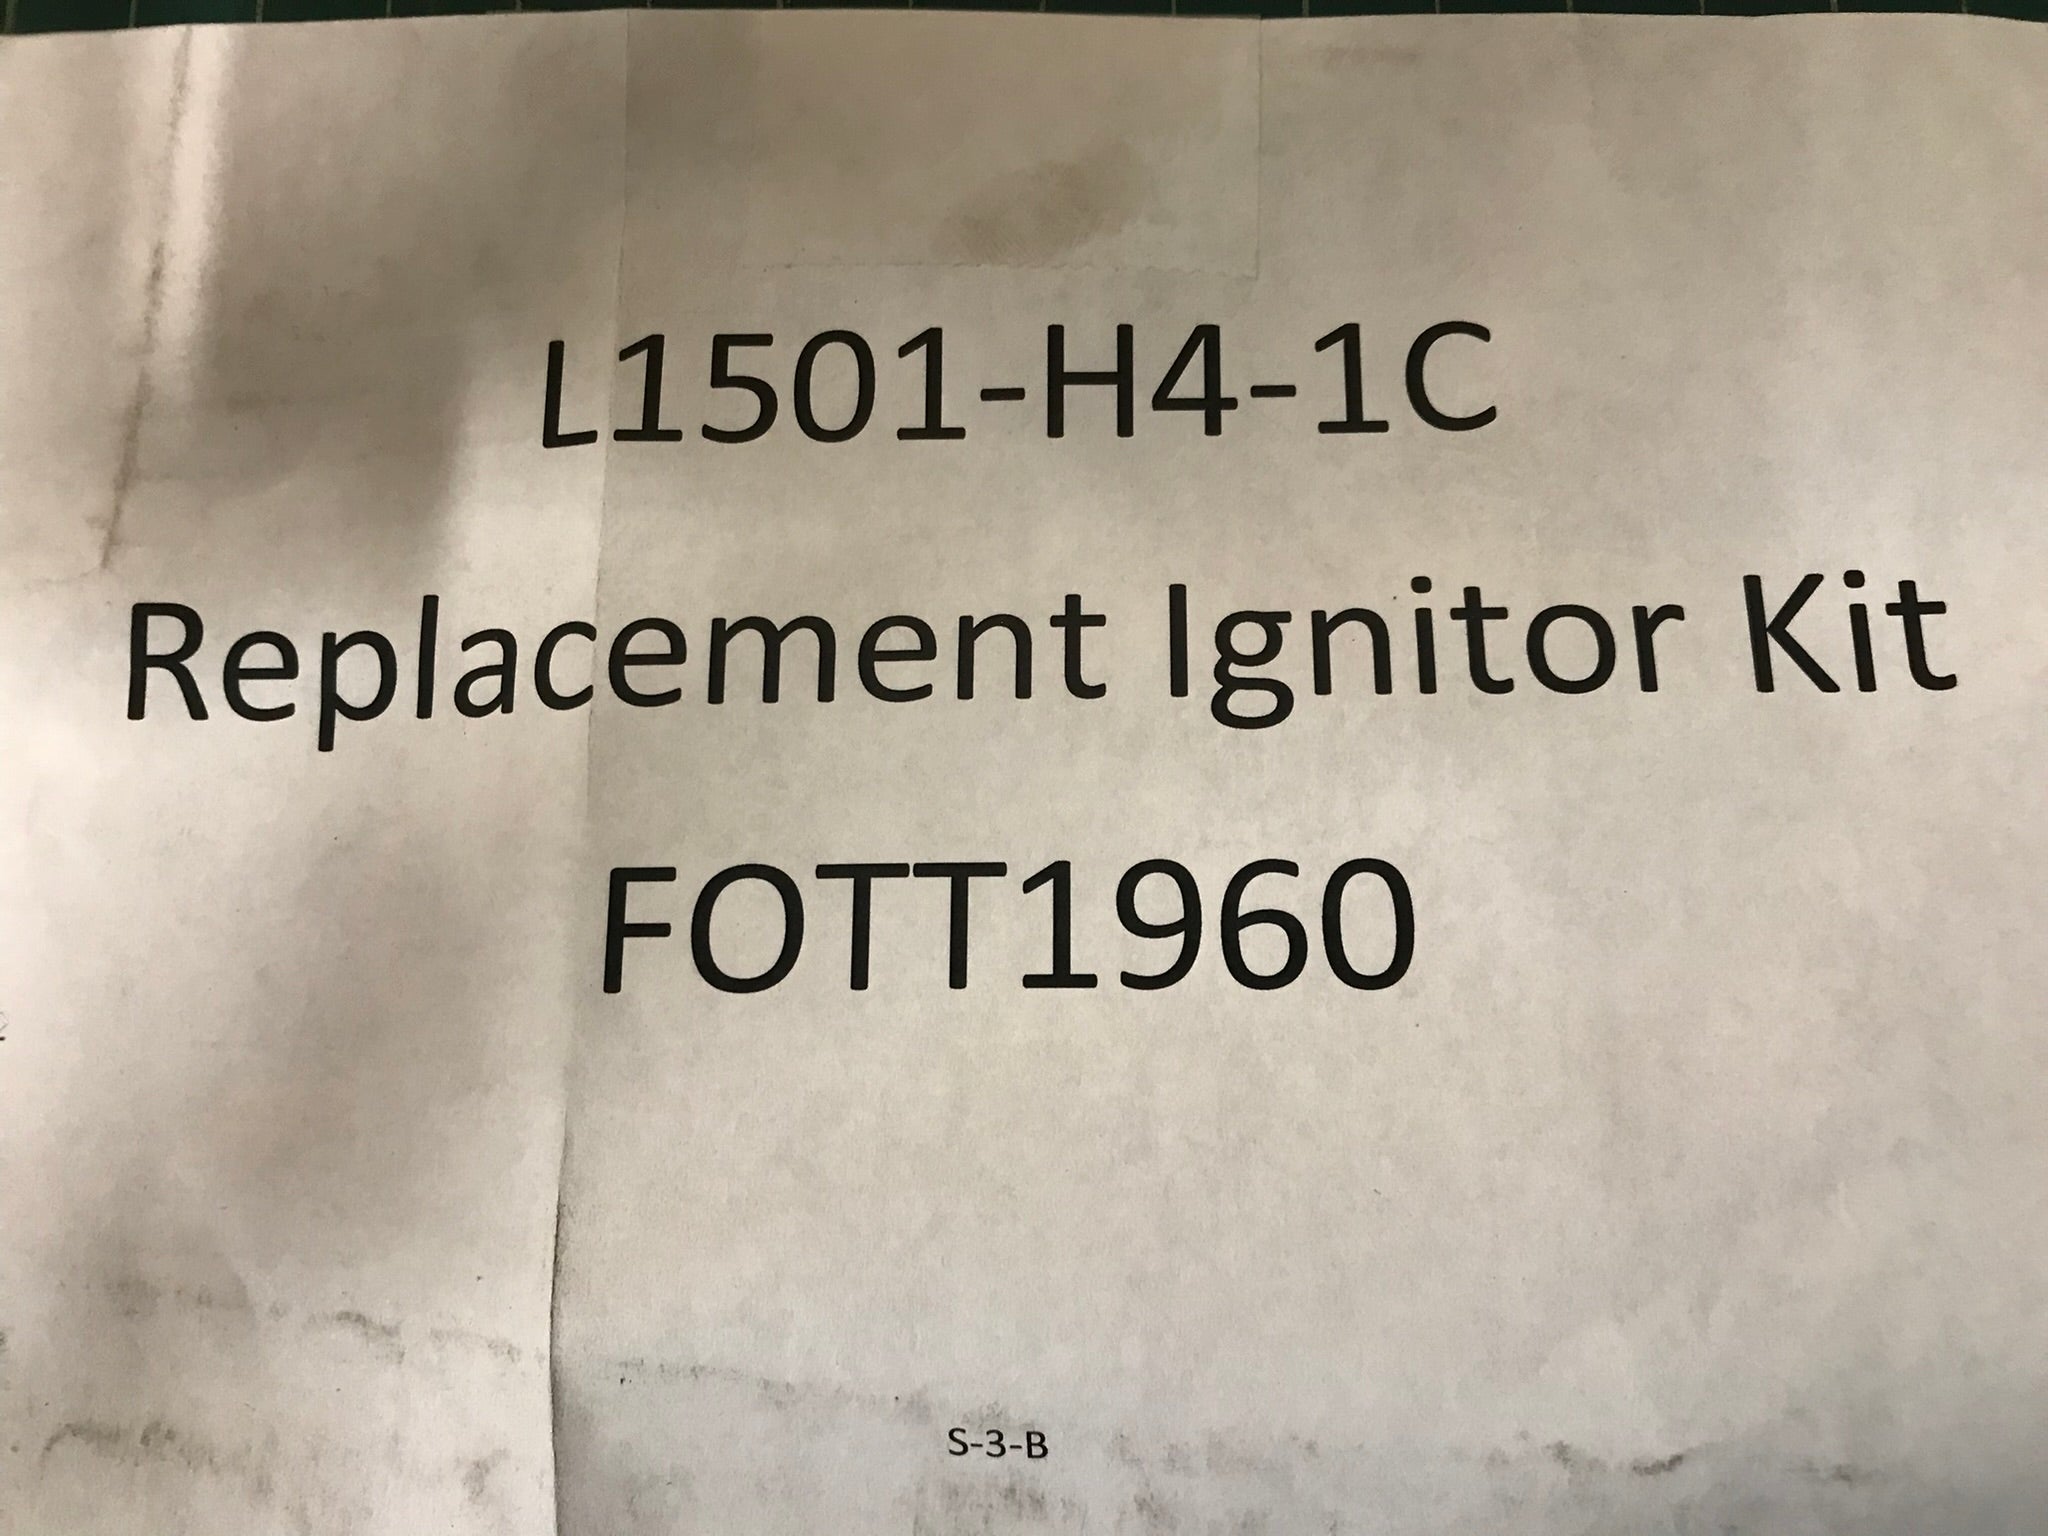 Replacement Ignitor Kit